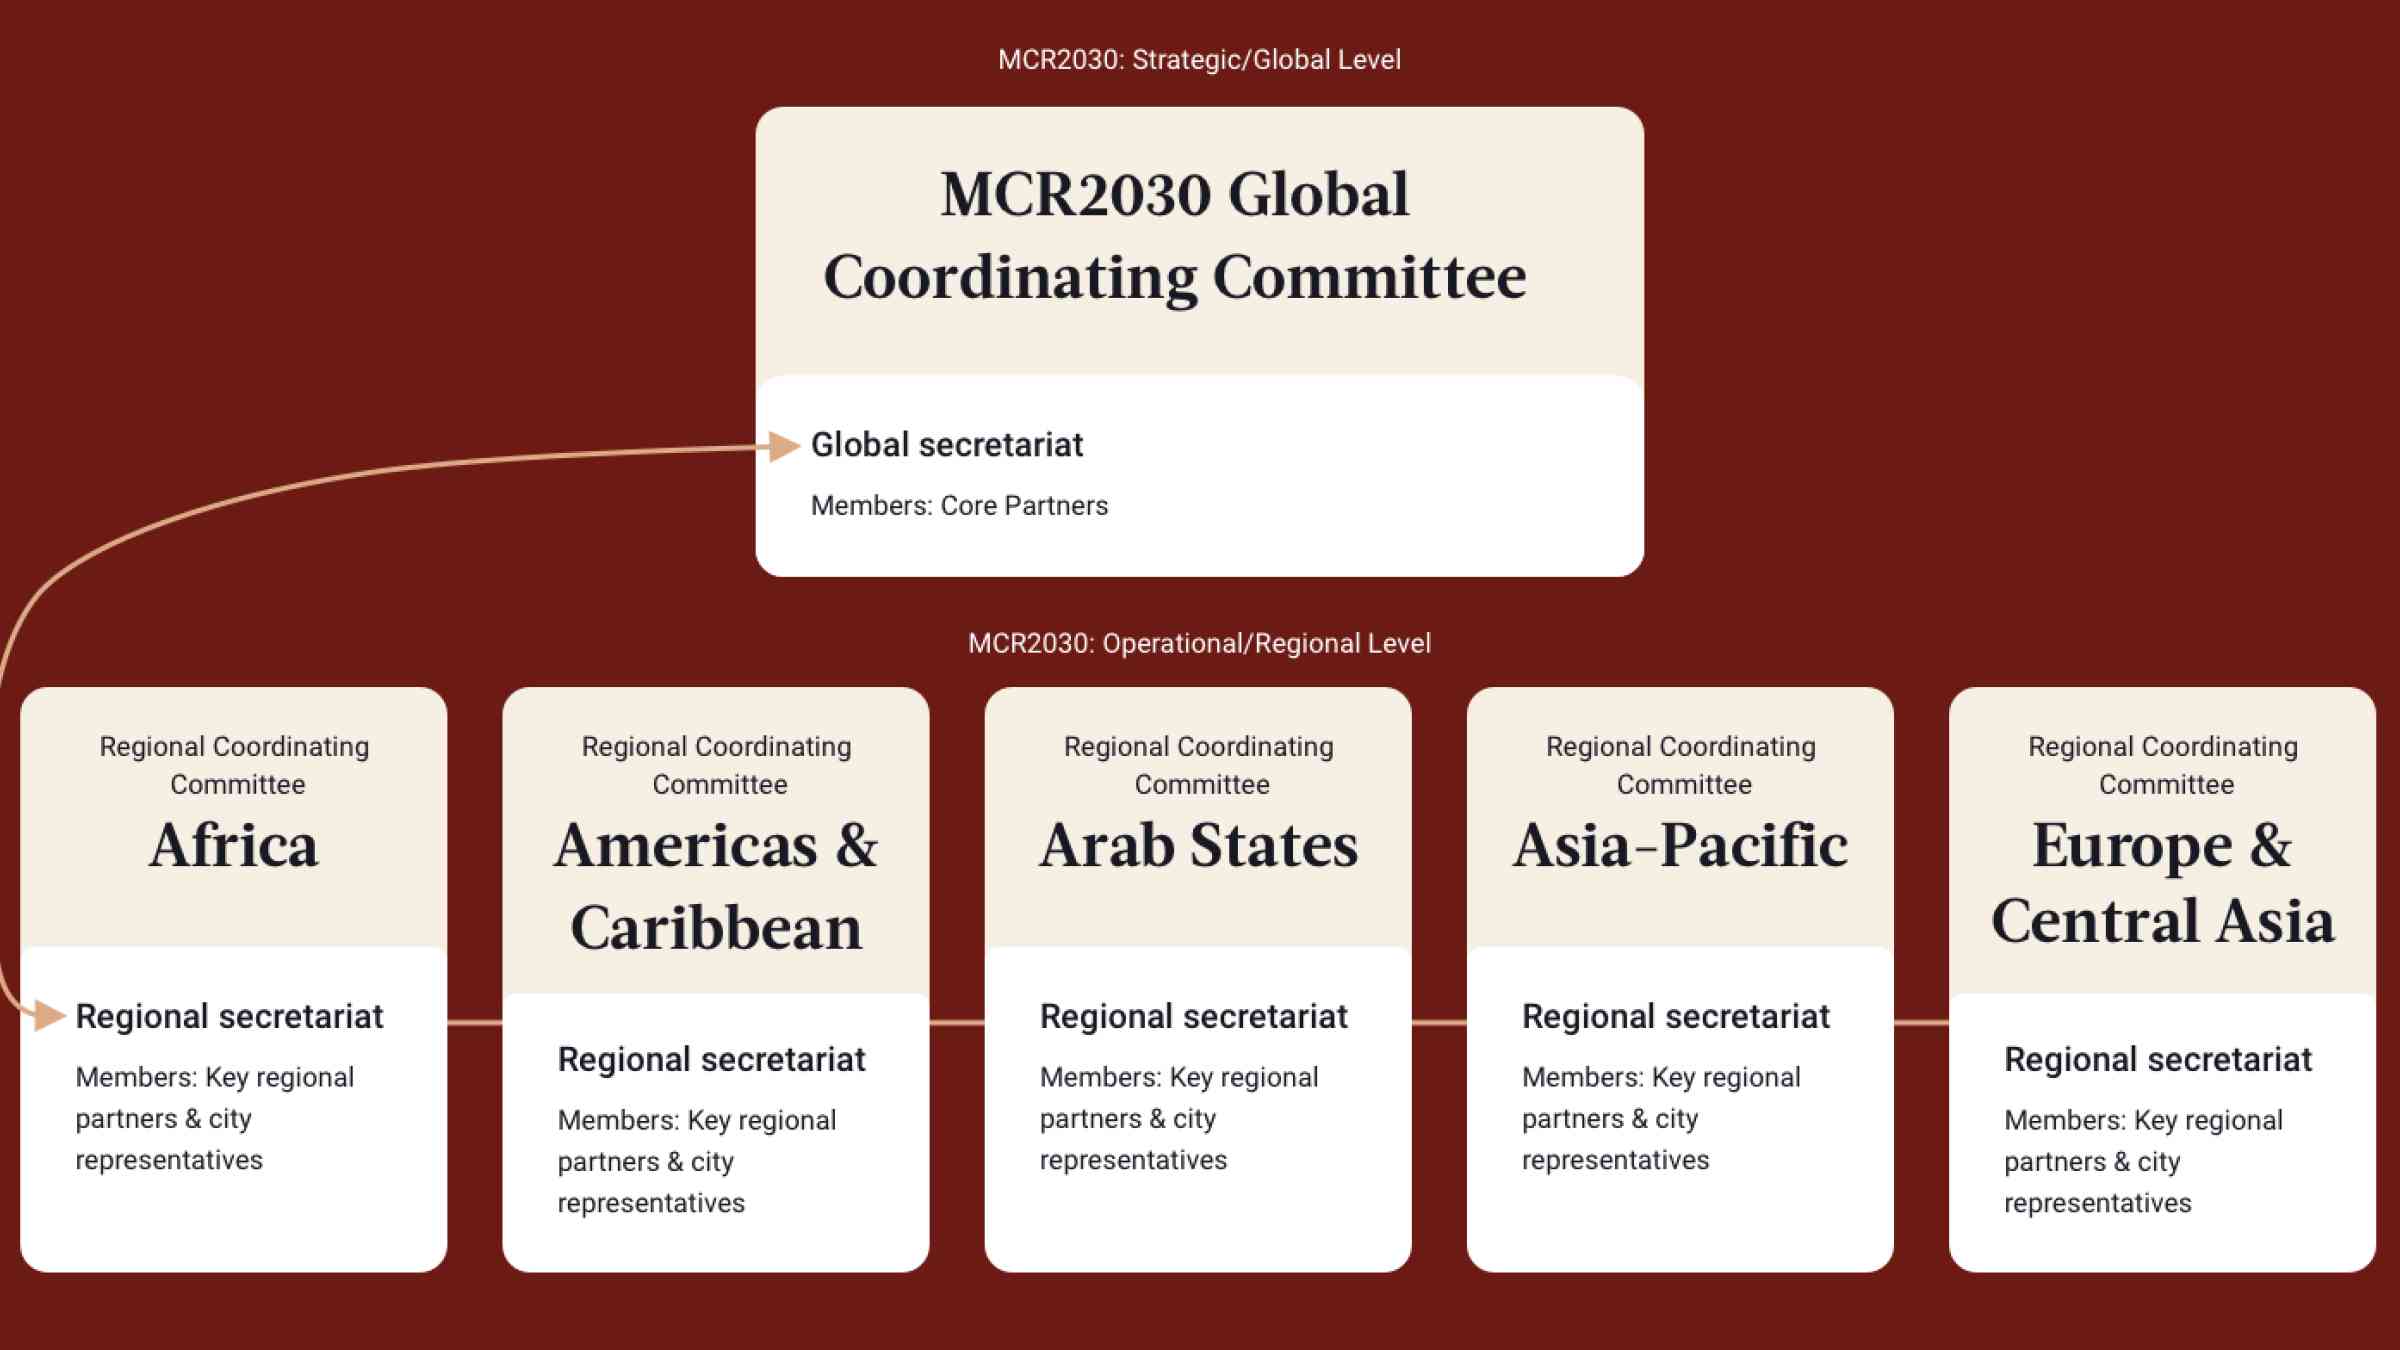 Organization chart showing at a Strategic and Global Level, MCR Global Coordinating Committee is the global secretariat with core partners as members. Underneath, five regional coordinating committees or regional secretariats with key partners and city representatives, one for each region, at a regional and operational level.